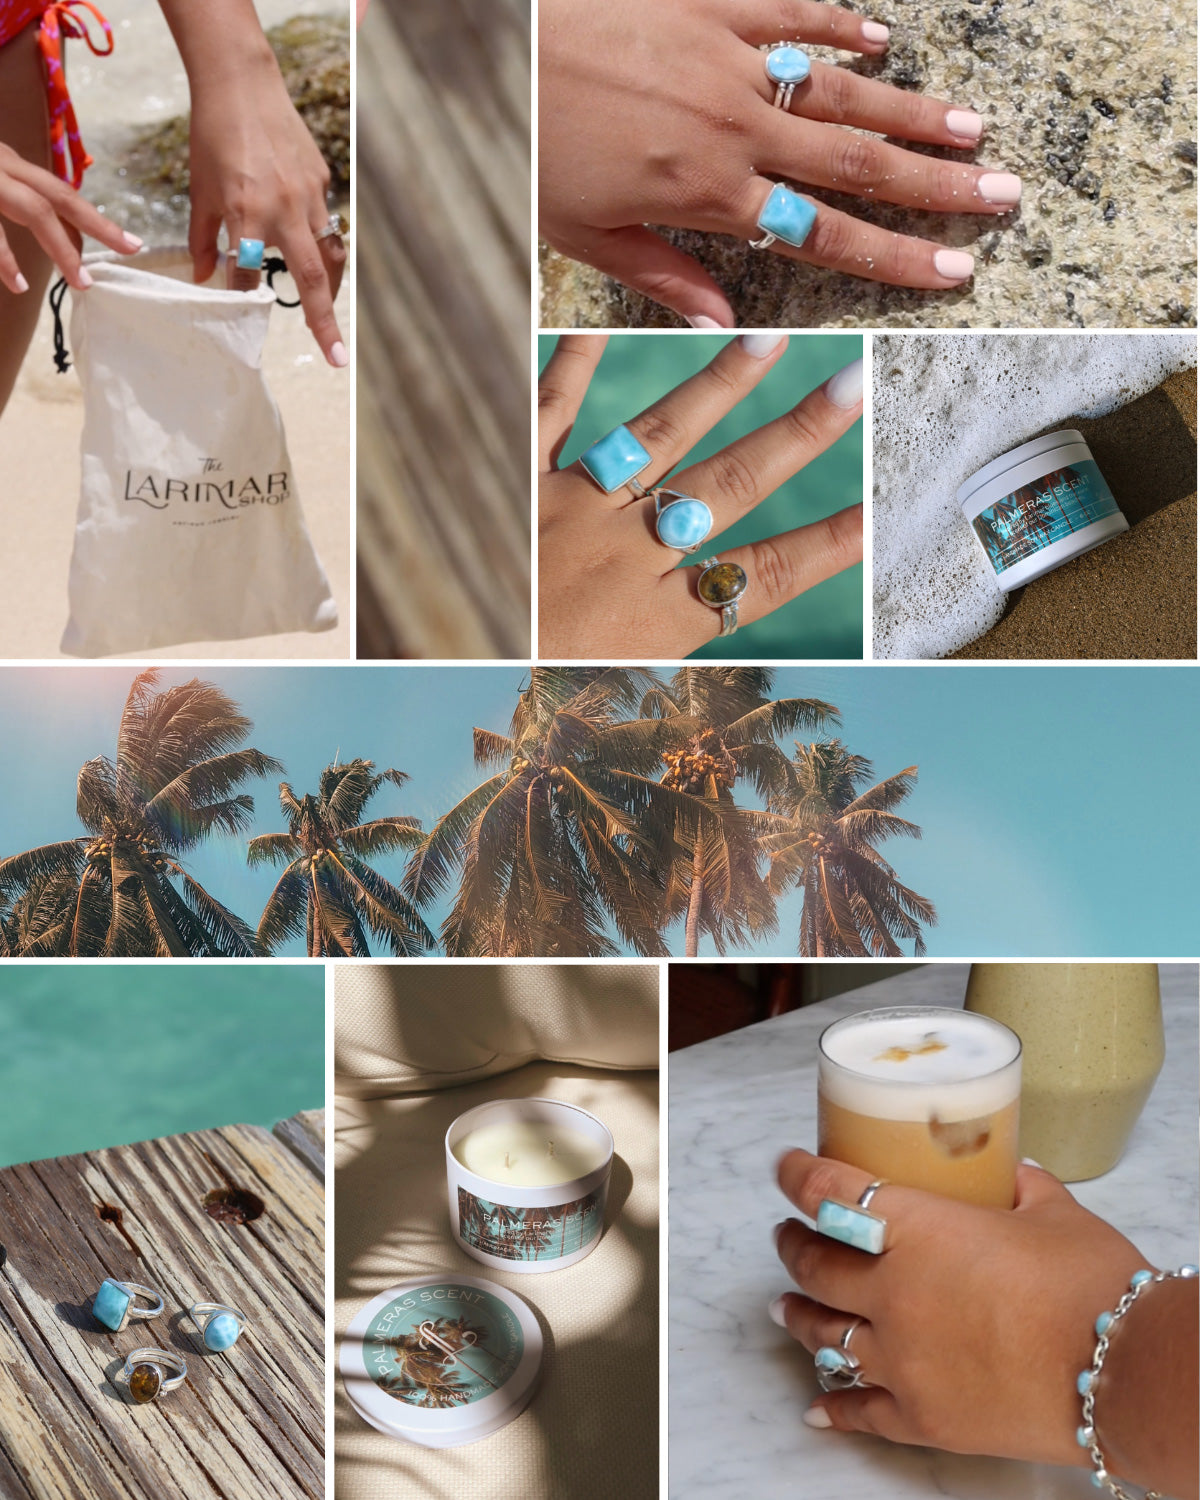 Assorted larimar rings and a woman wearing larimar stone rings at the beach with summer-scented candles and palm trees in the background.